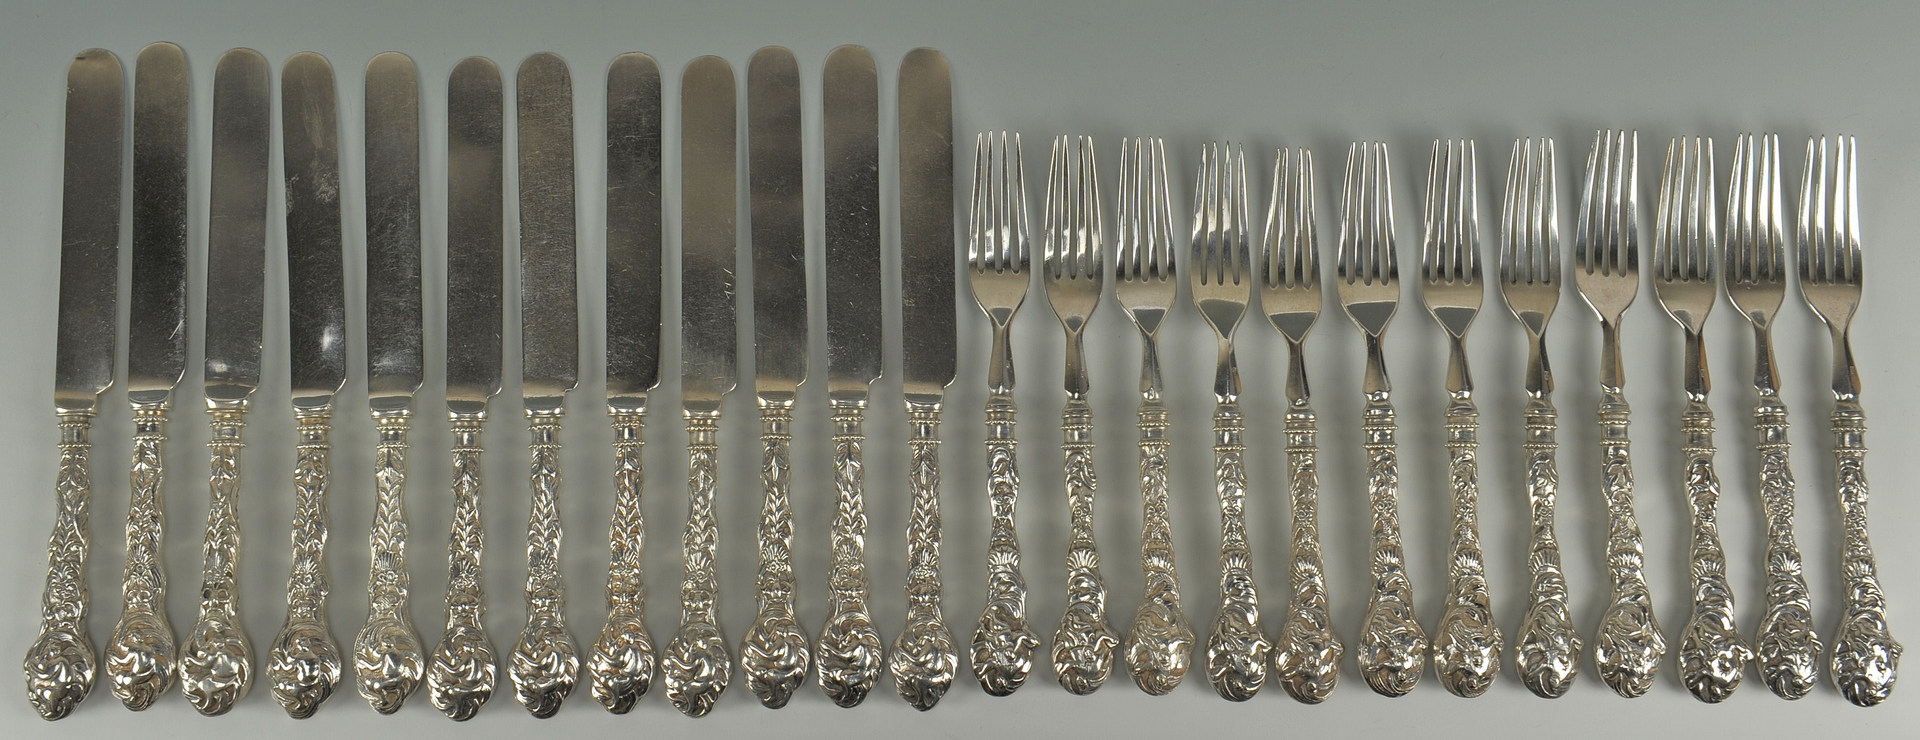 Lot 2: Chinese Export Silver Forks and Knifes, 24 pcs.